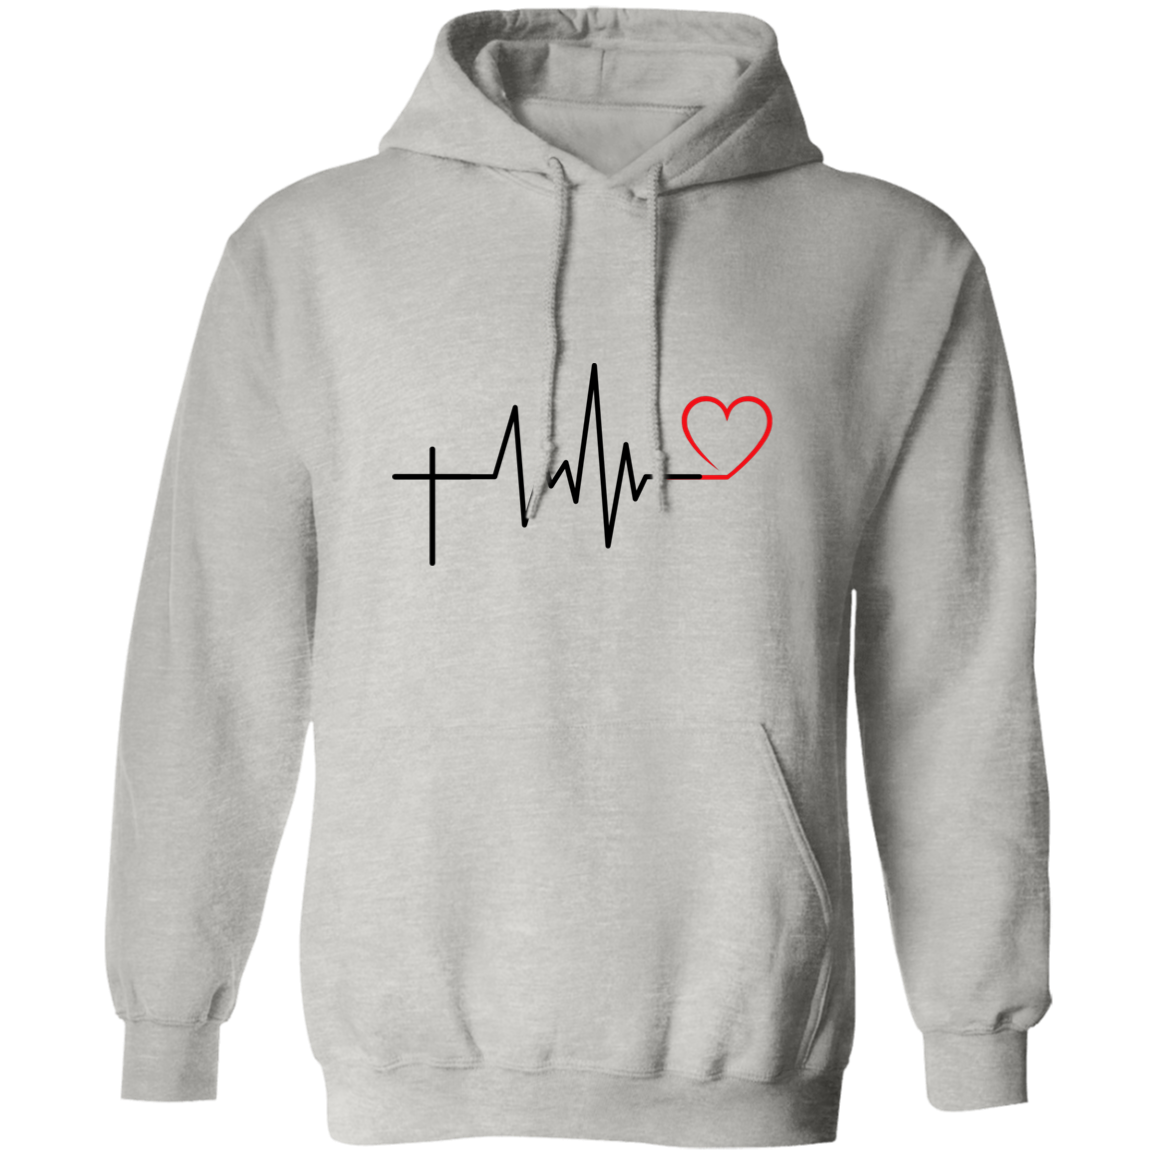 Cross Your Heart Pullover Hoodie